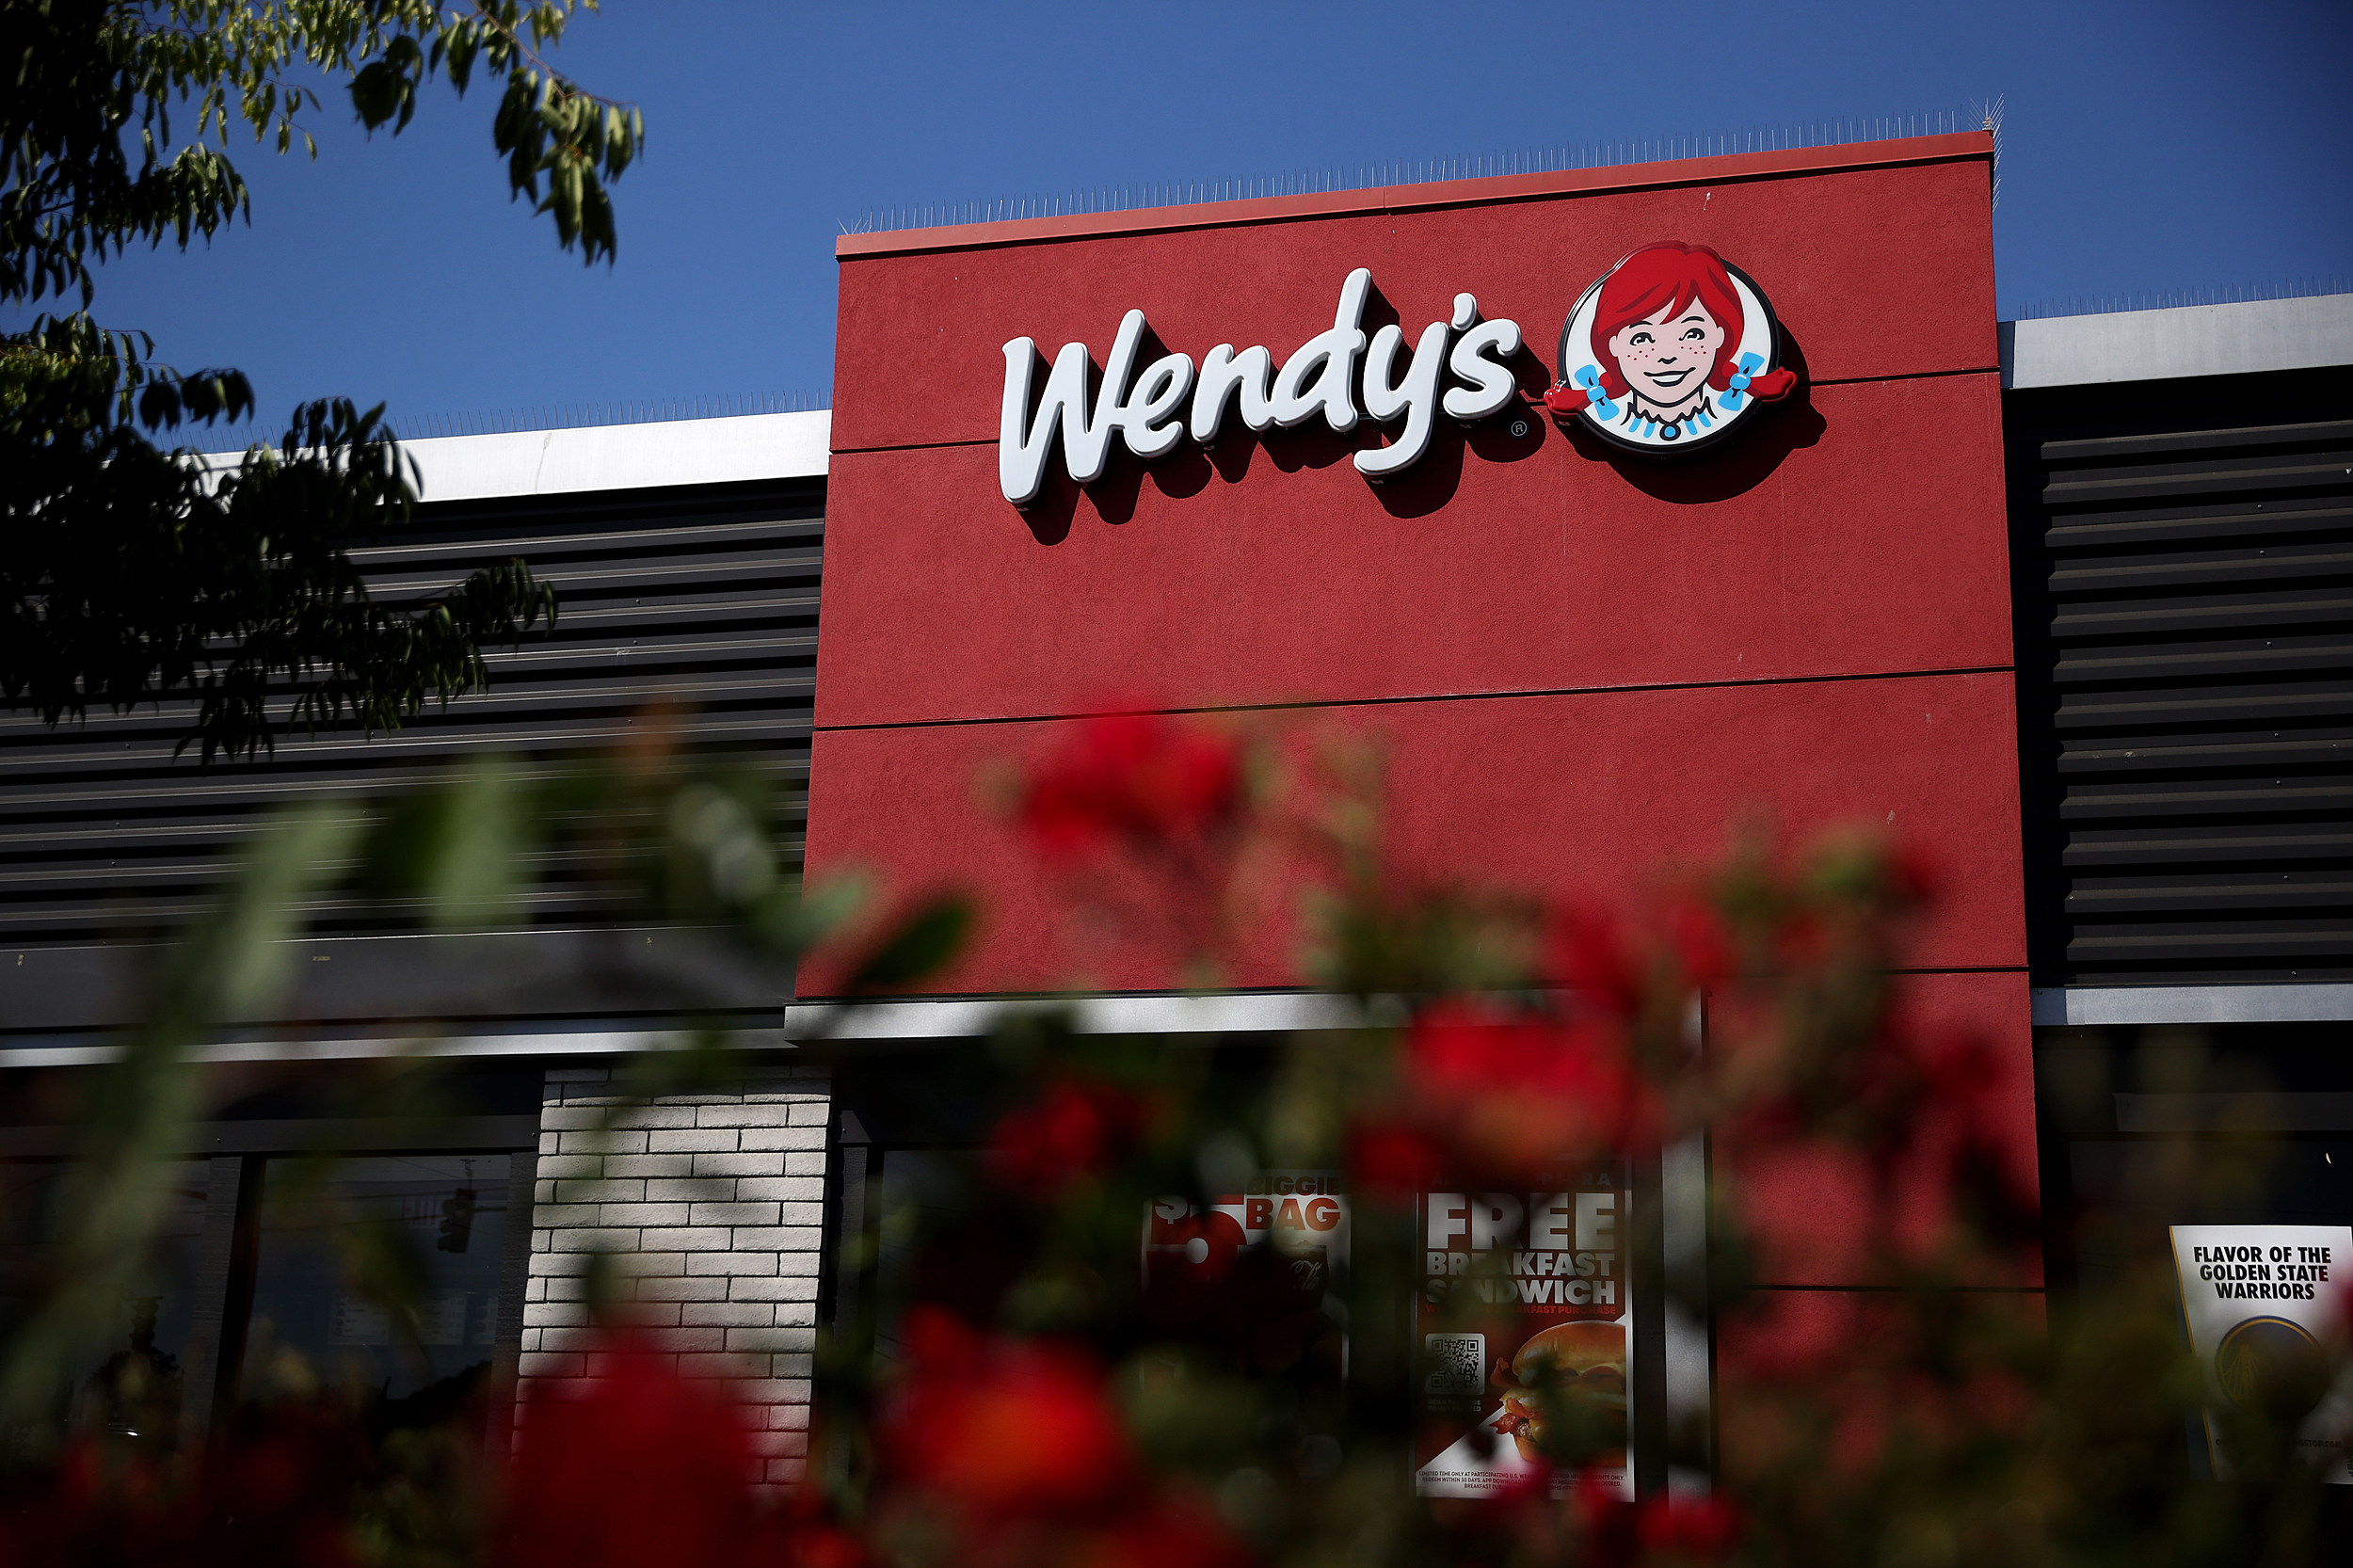 Eagles free Wendy's Frosty: How to get one